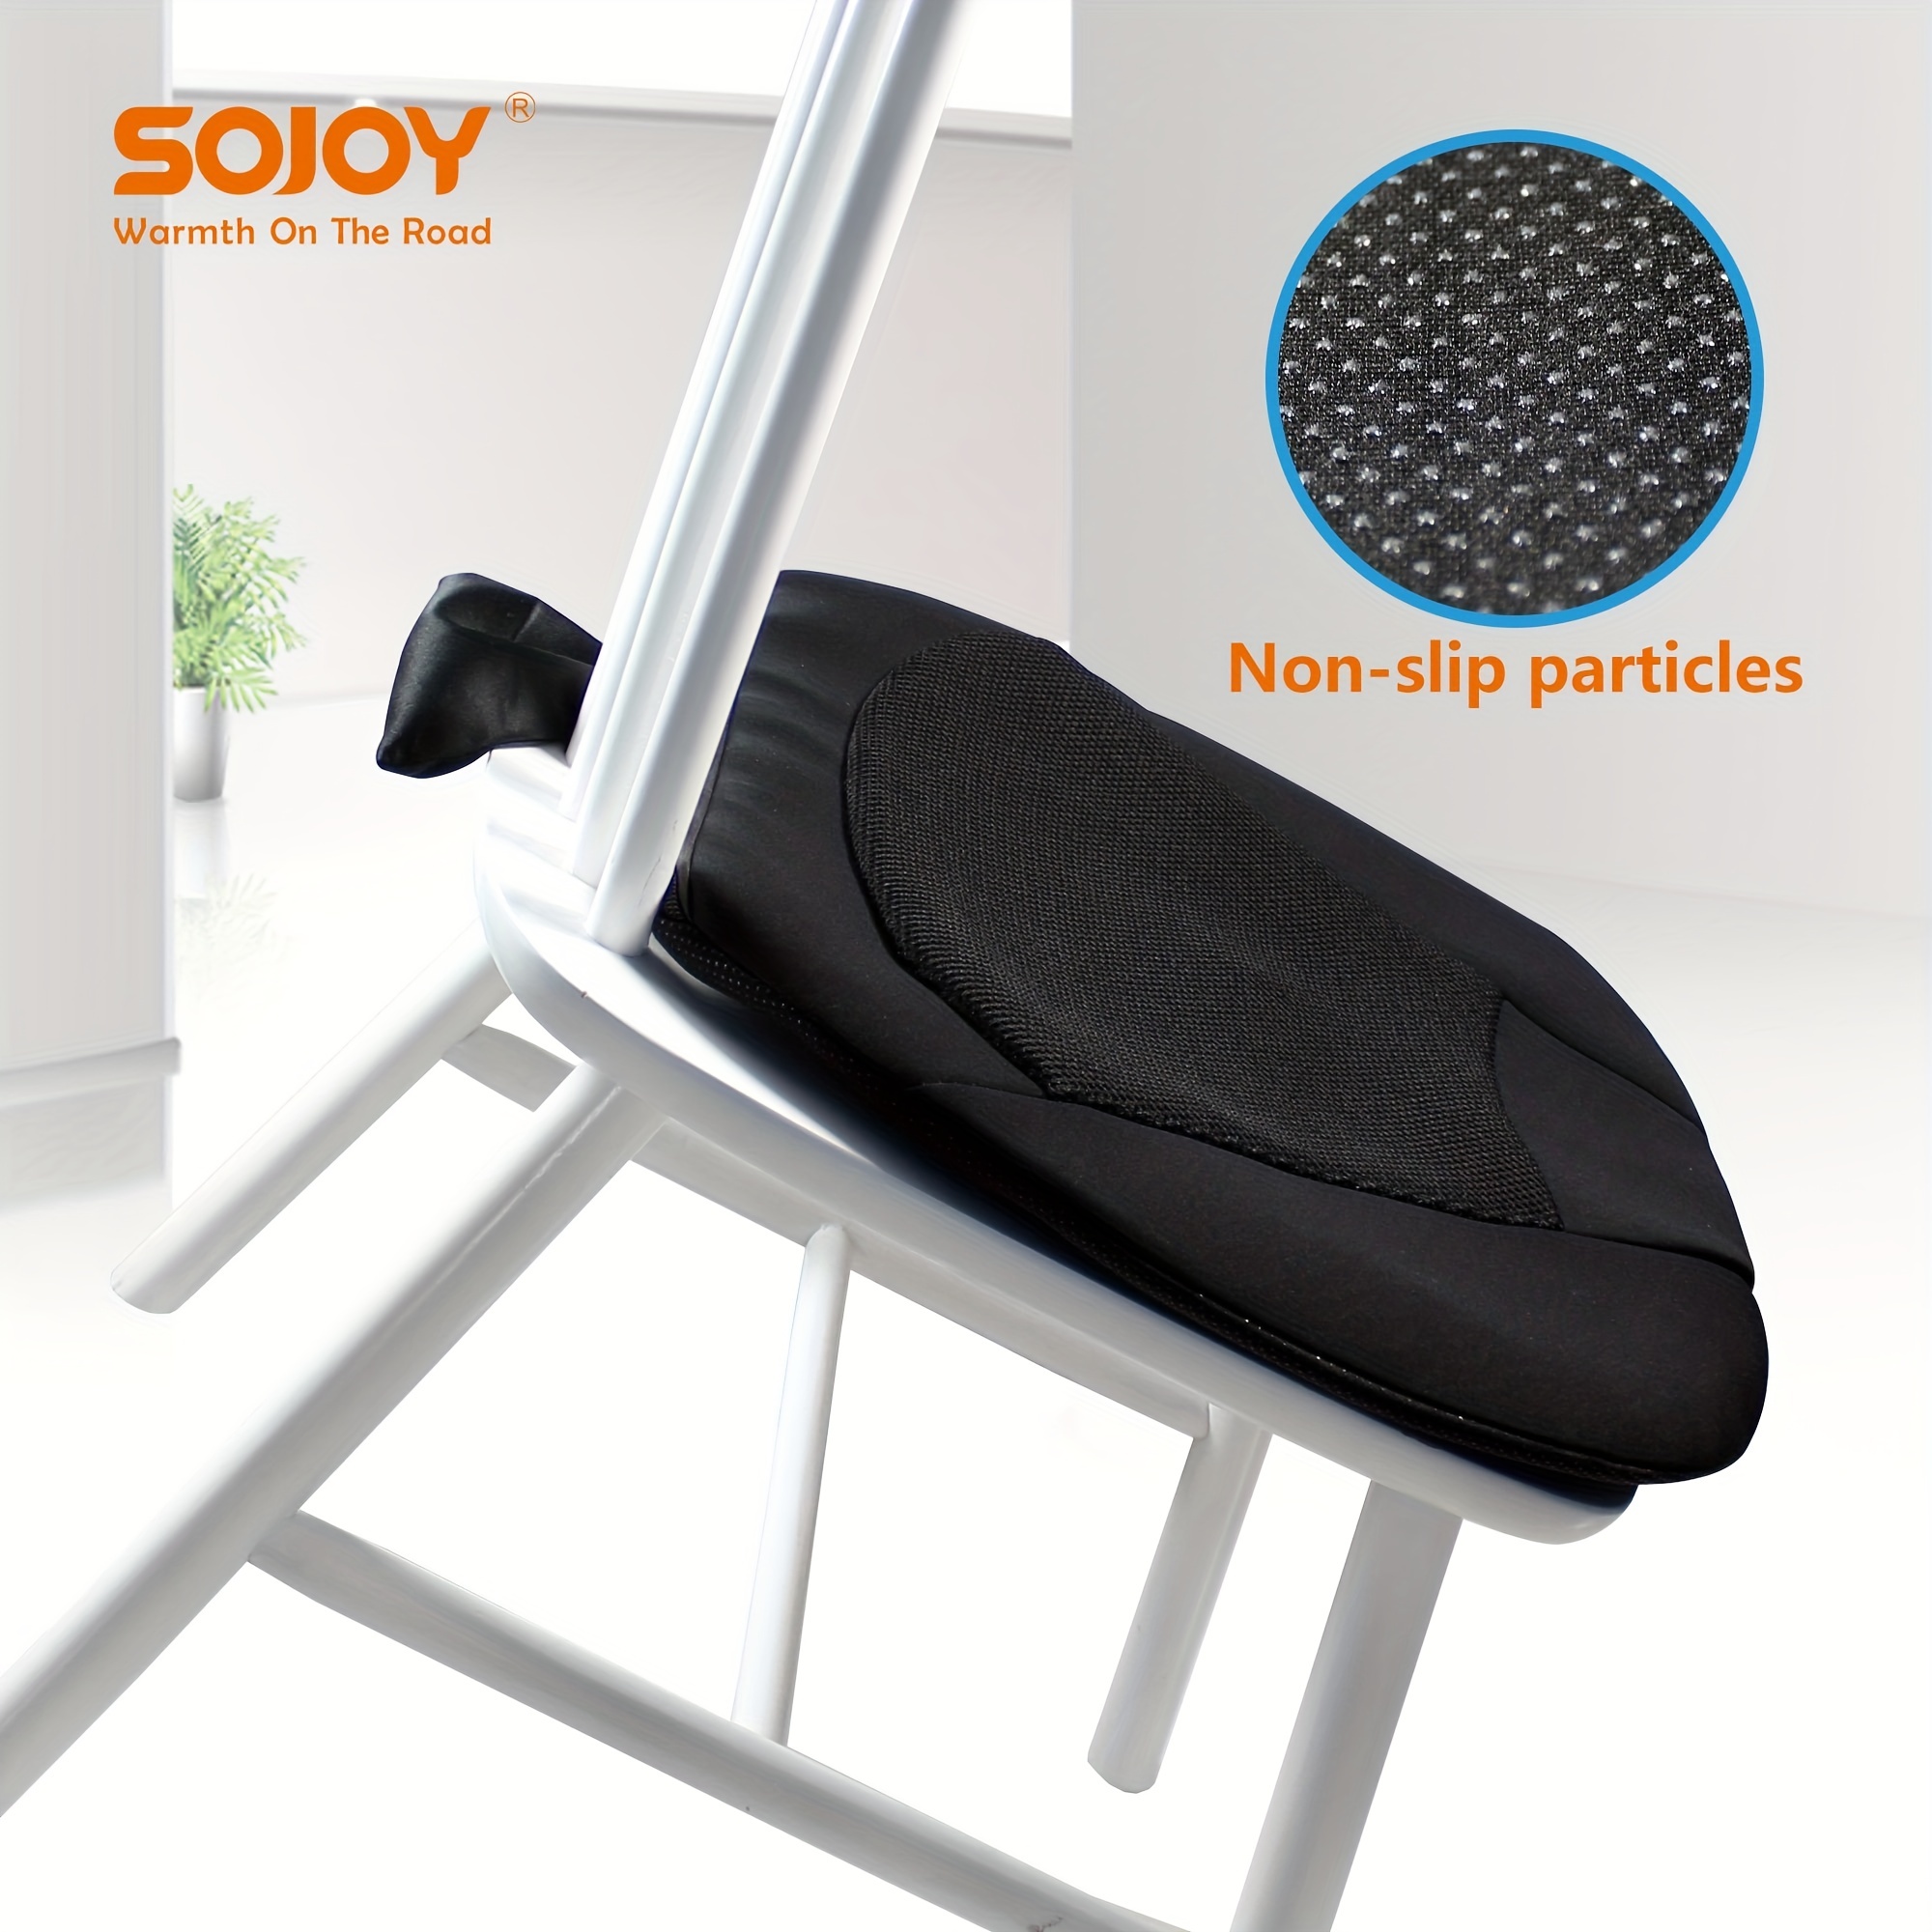 Smart Travel Comfort: Sojoy 3-in-1 Foldable Memory Foam Seat Cushion - A  Must-Have for Any Journey!